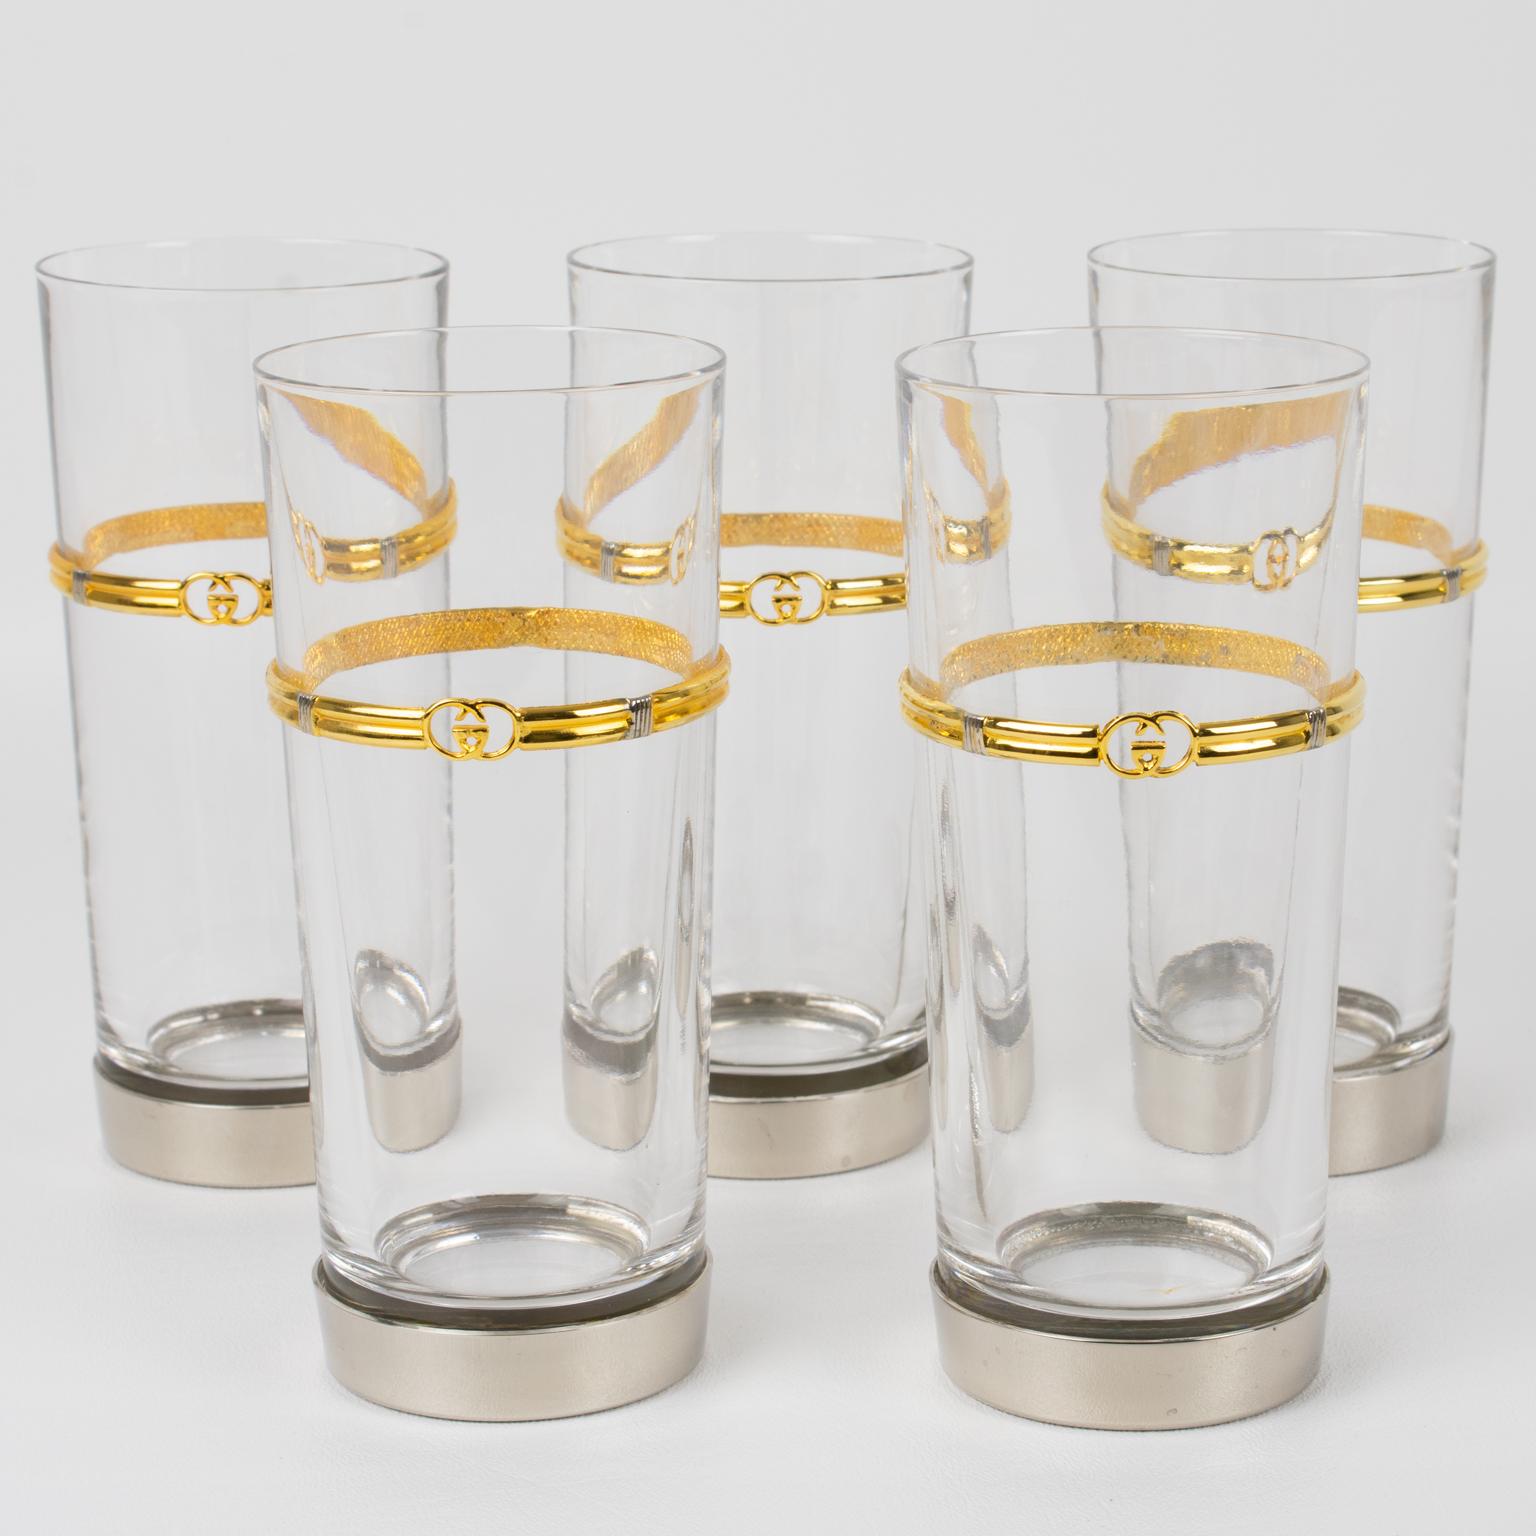 Gucci Italy Barware Set Silver Plate and Crystal HighBall Tumbler Glasses, 5 pc For Sale 1